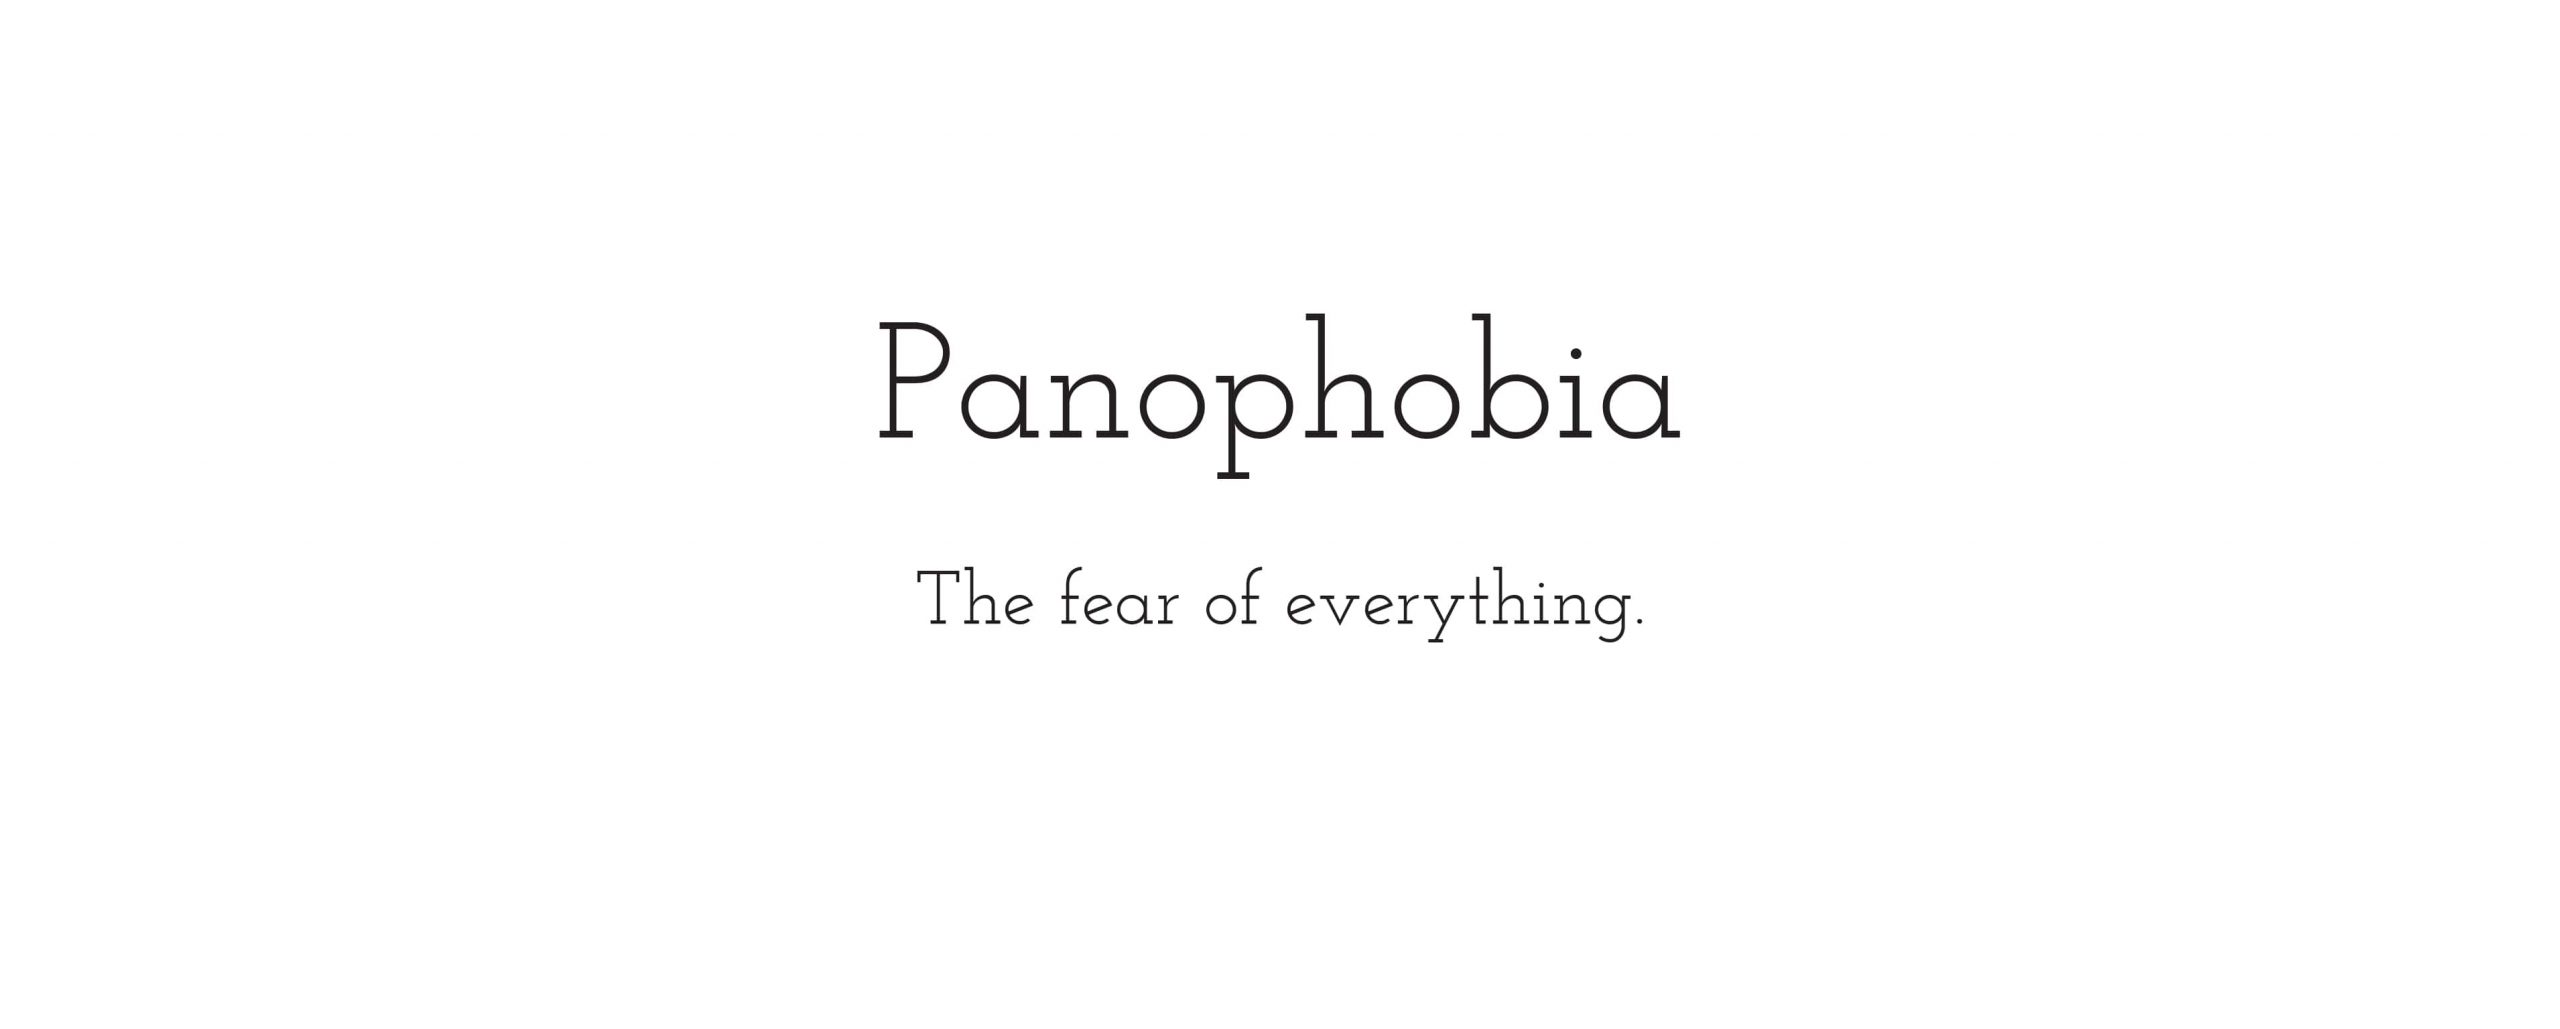 Panophobia: the fear of everything